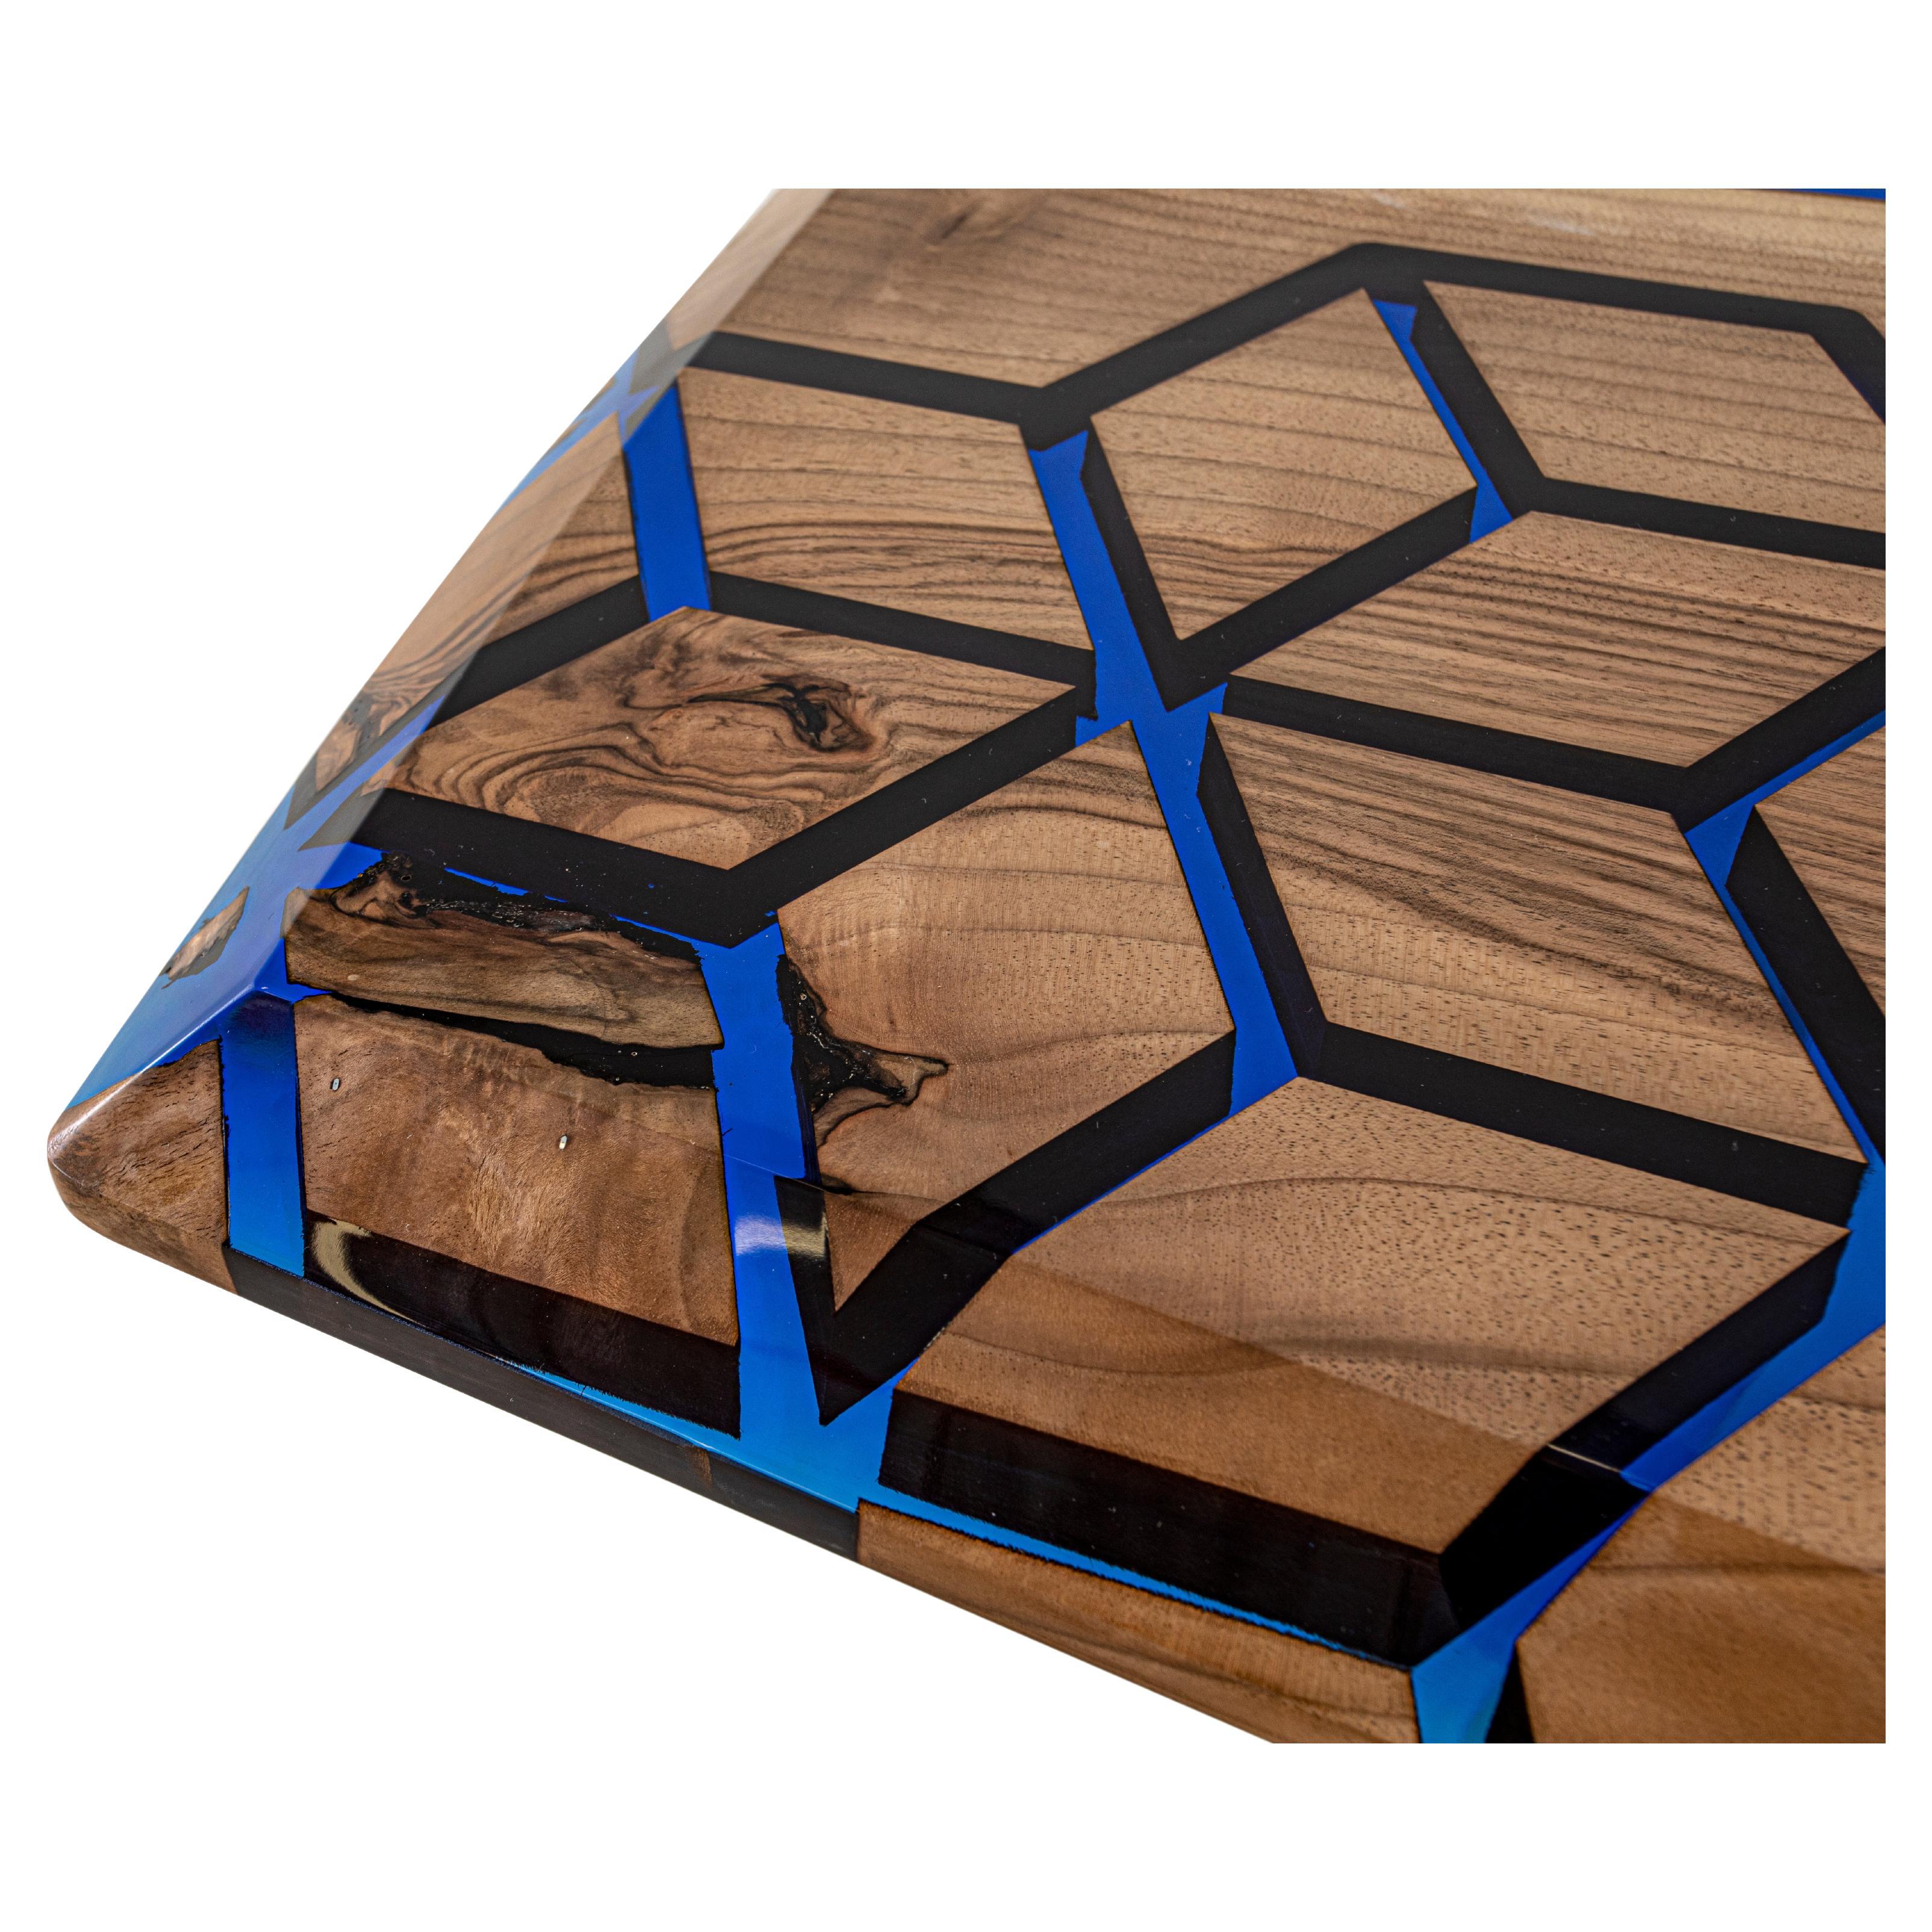 Diamond Shaped Epoxy Resin Table

This table is made of walnut wood. We combined walnut wood with night blue epoxy resin colour. 

Custom sizes, colours and finishes are available!